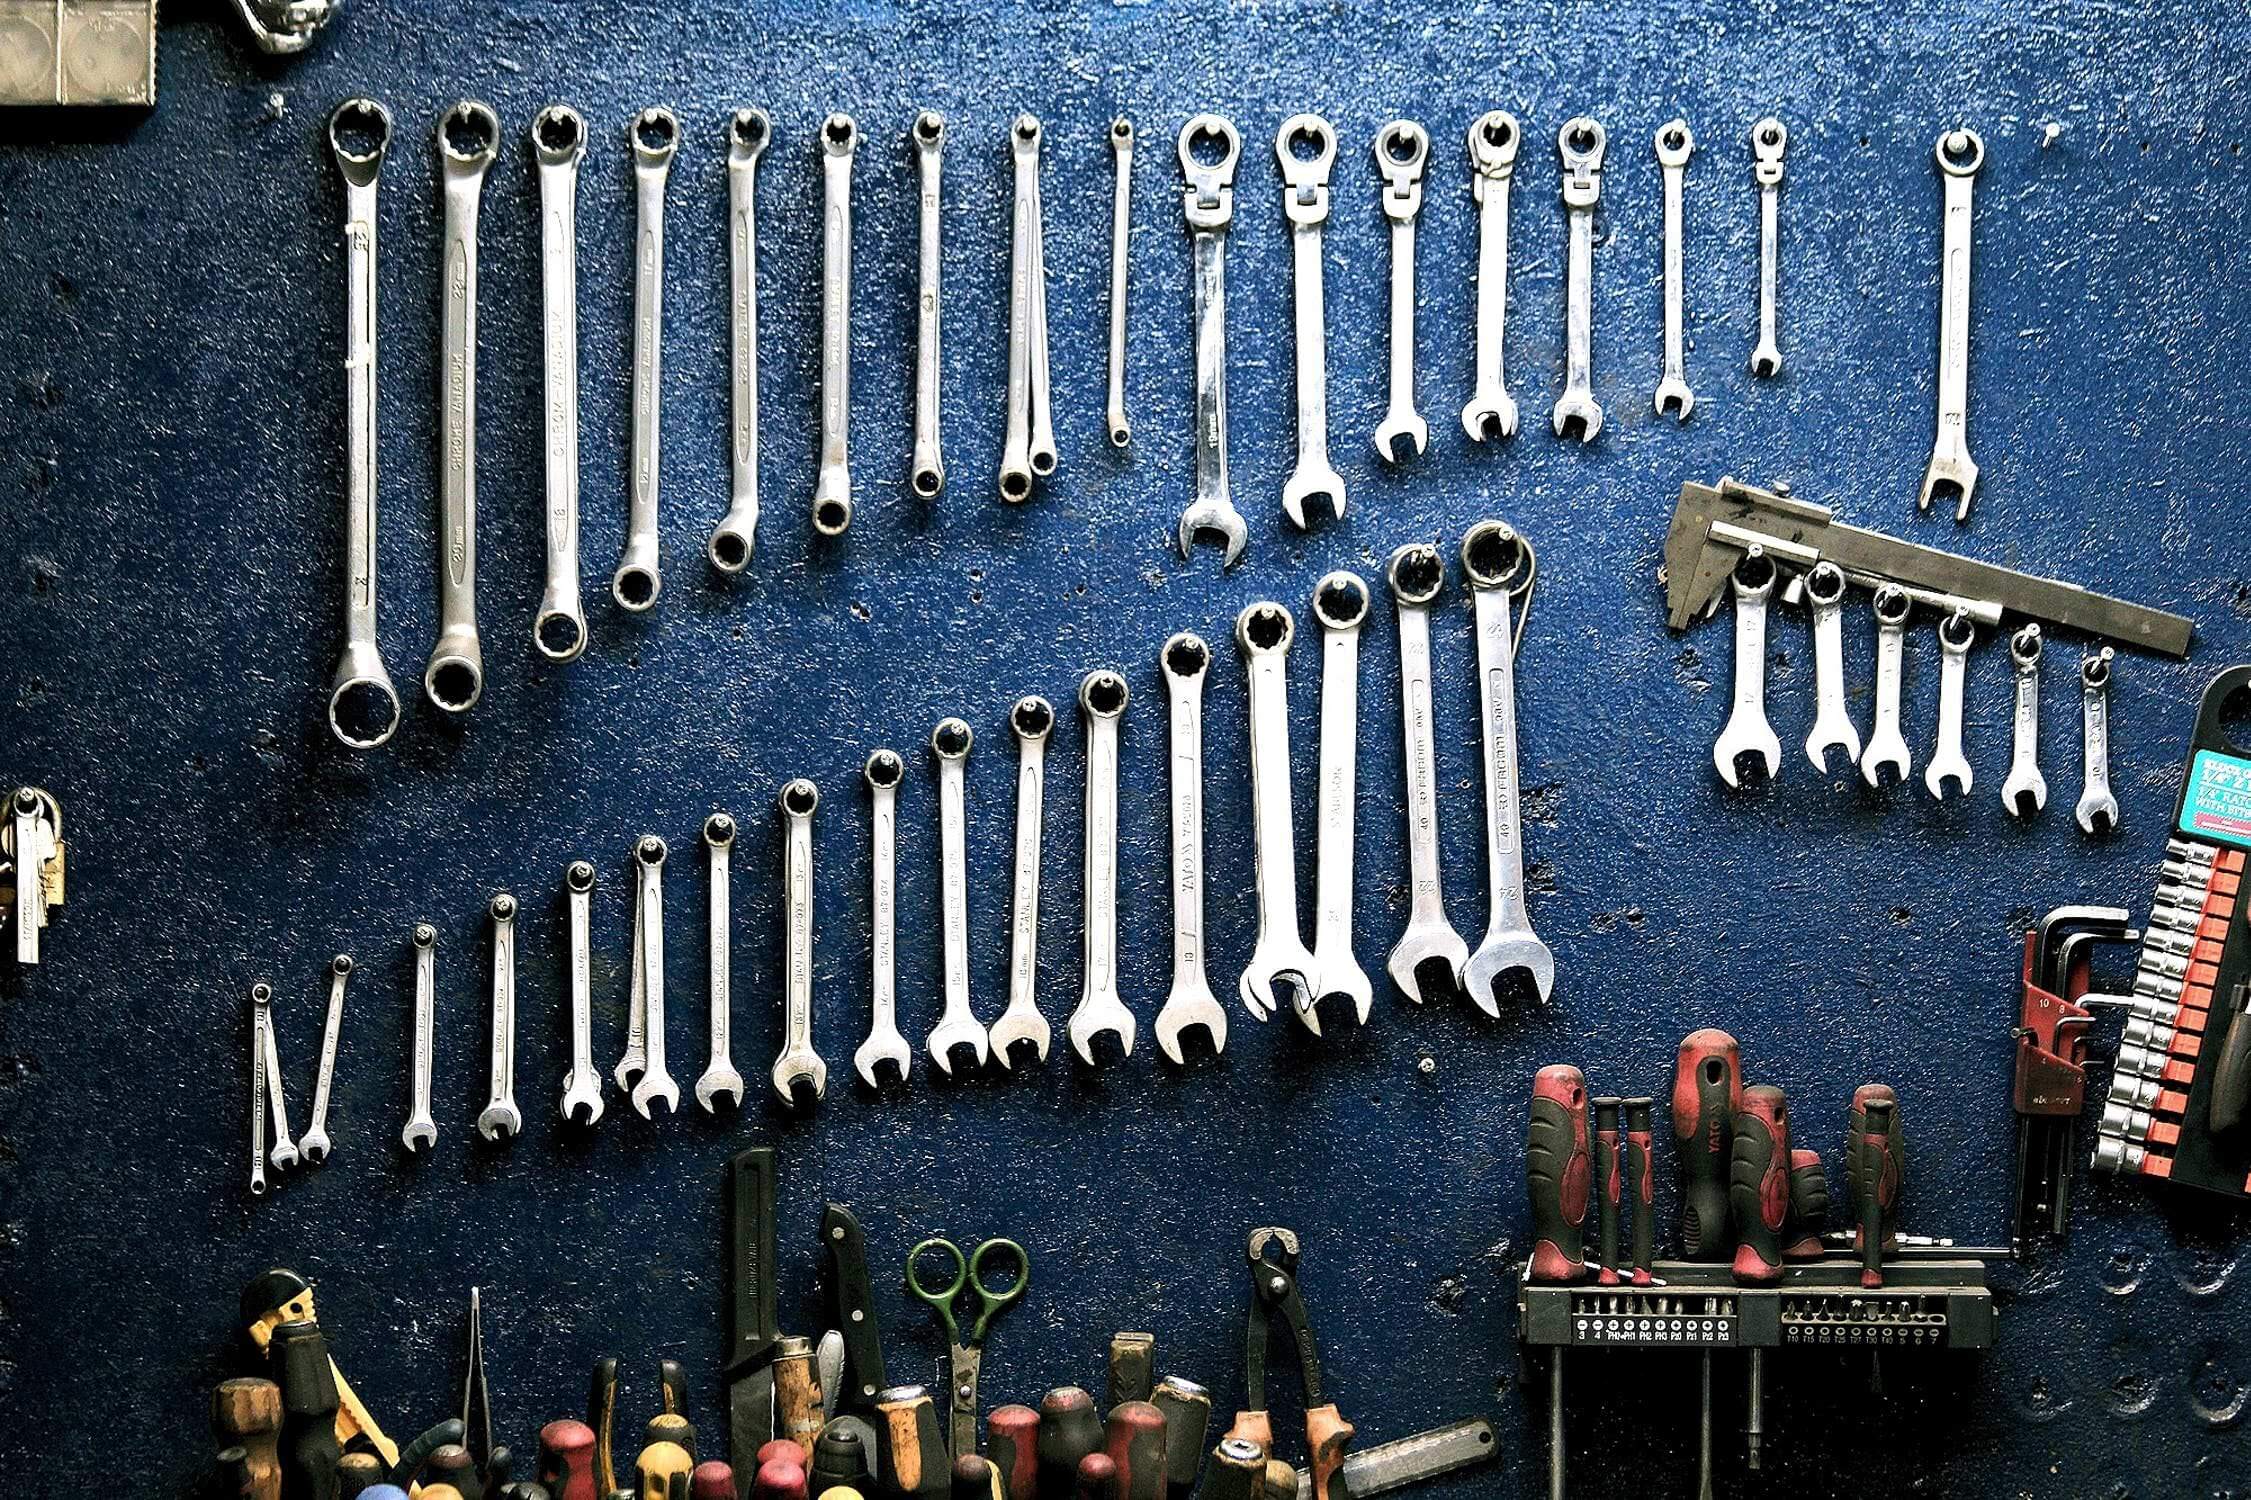 Use a variety of tools to get the job done